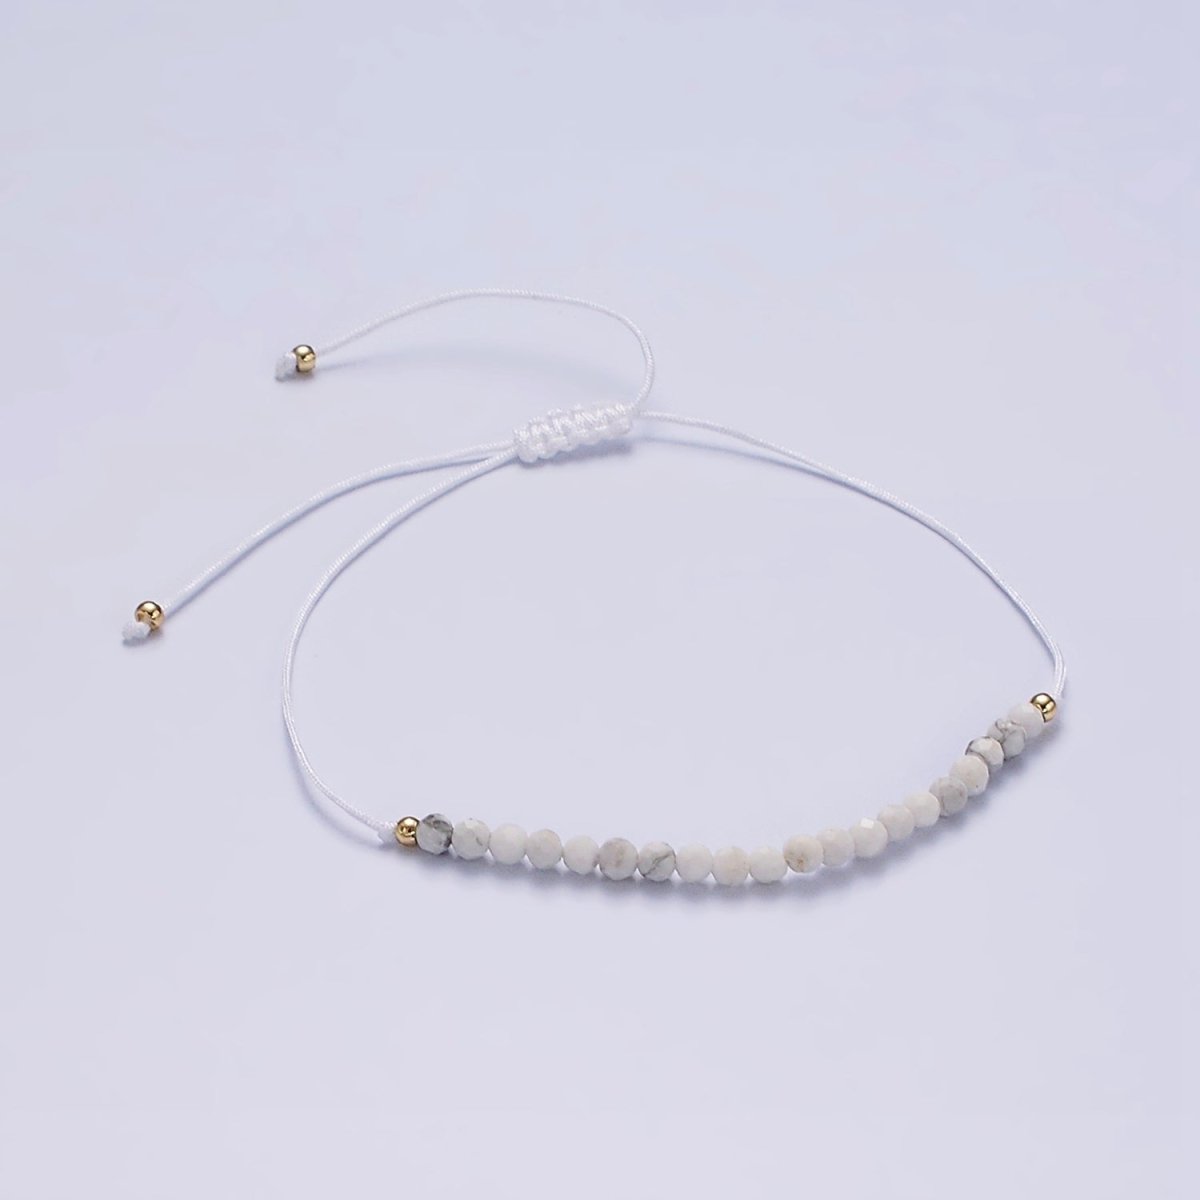 14K Gold Filled Howlite Multifaceted White Cotton String Adjustable Bracelet | WA-2184 - WA-2186 Clearance Pricing - DLUXCA